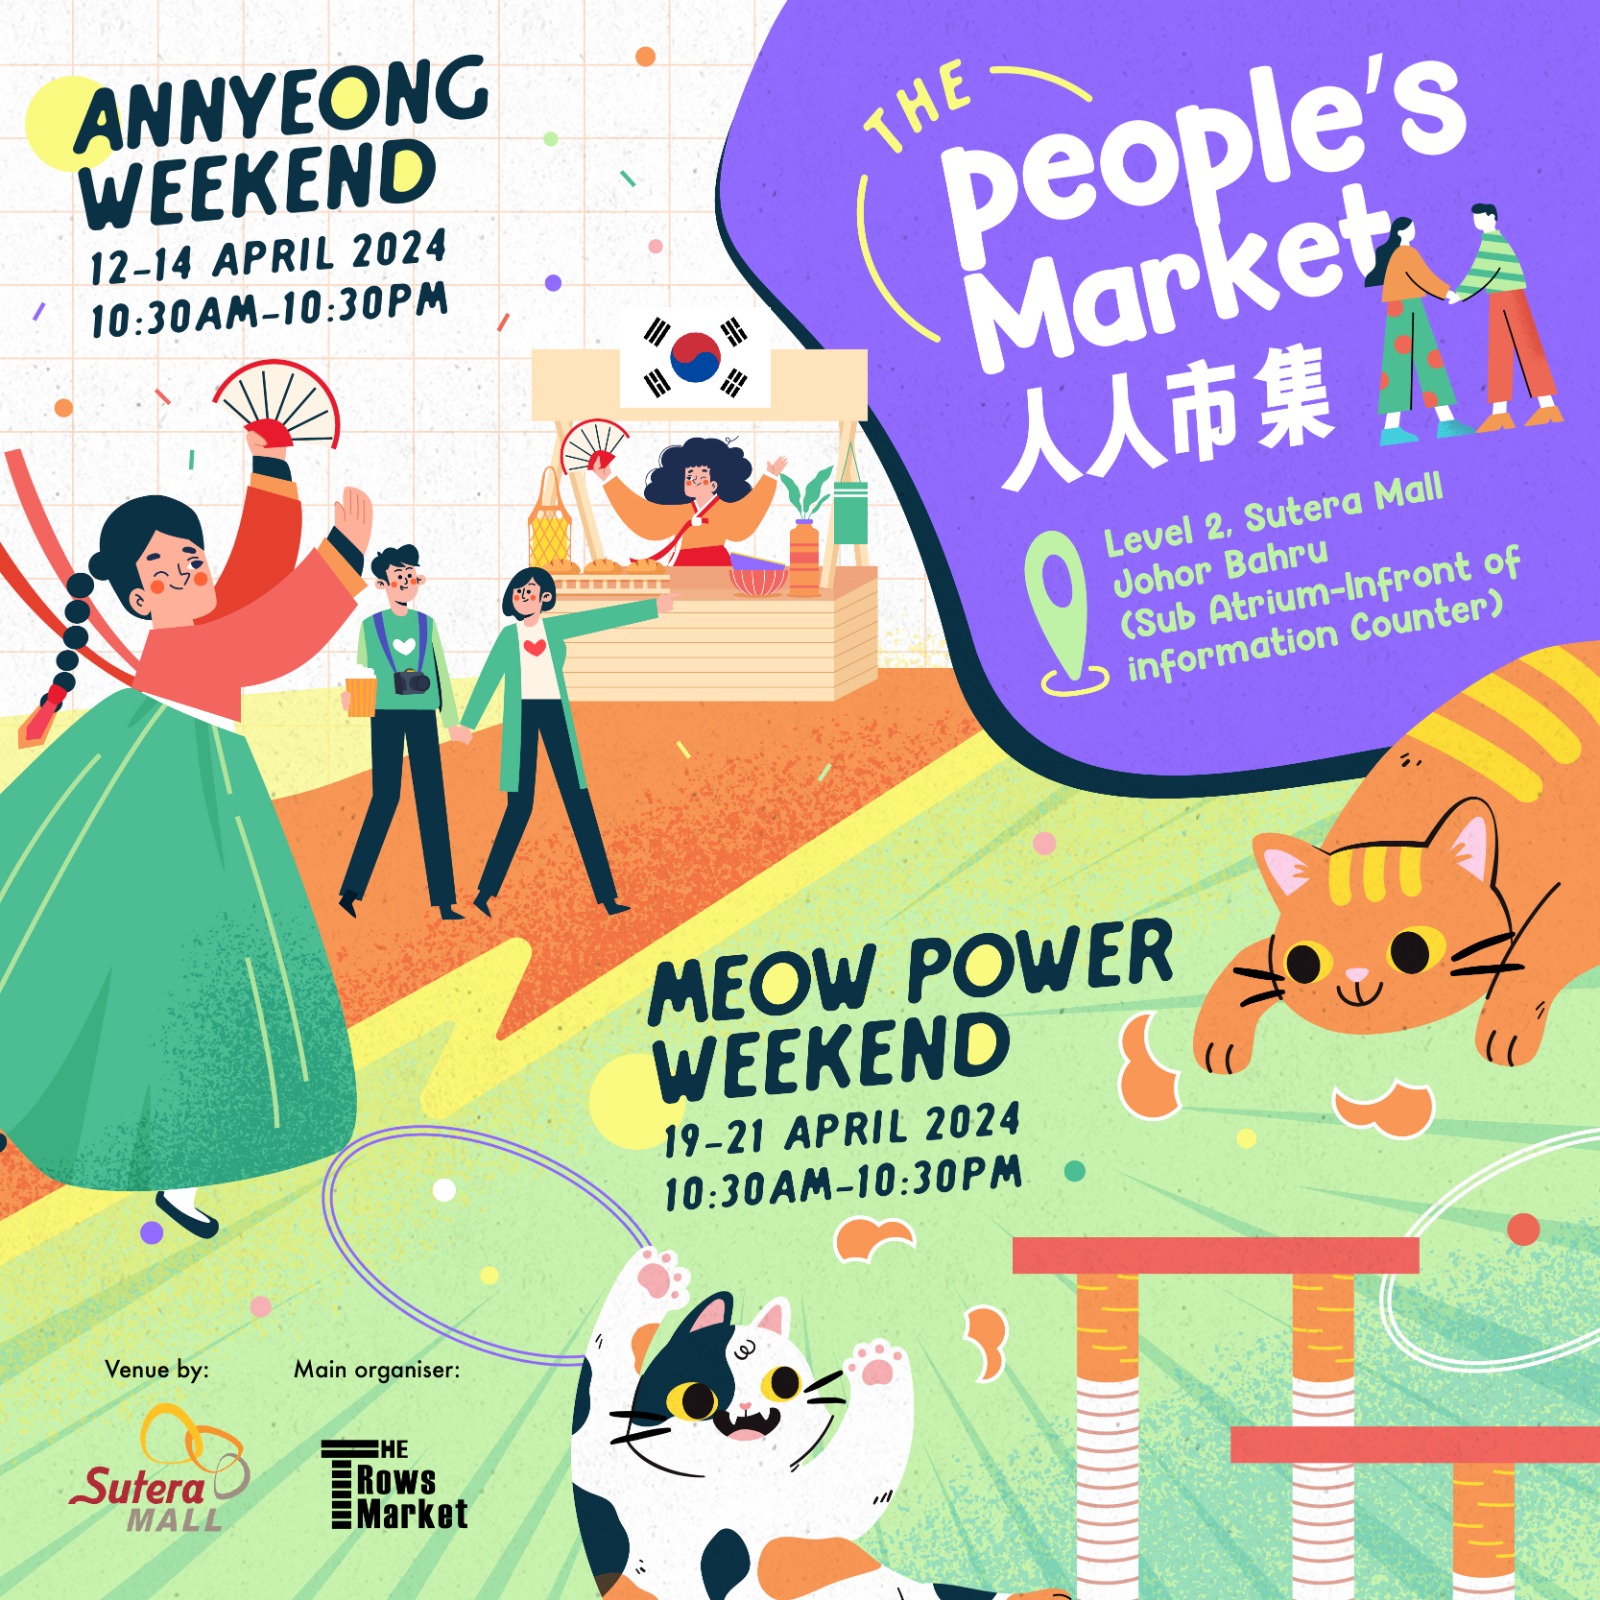 Annyeong! The People's Market